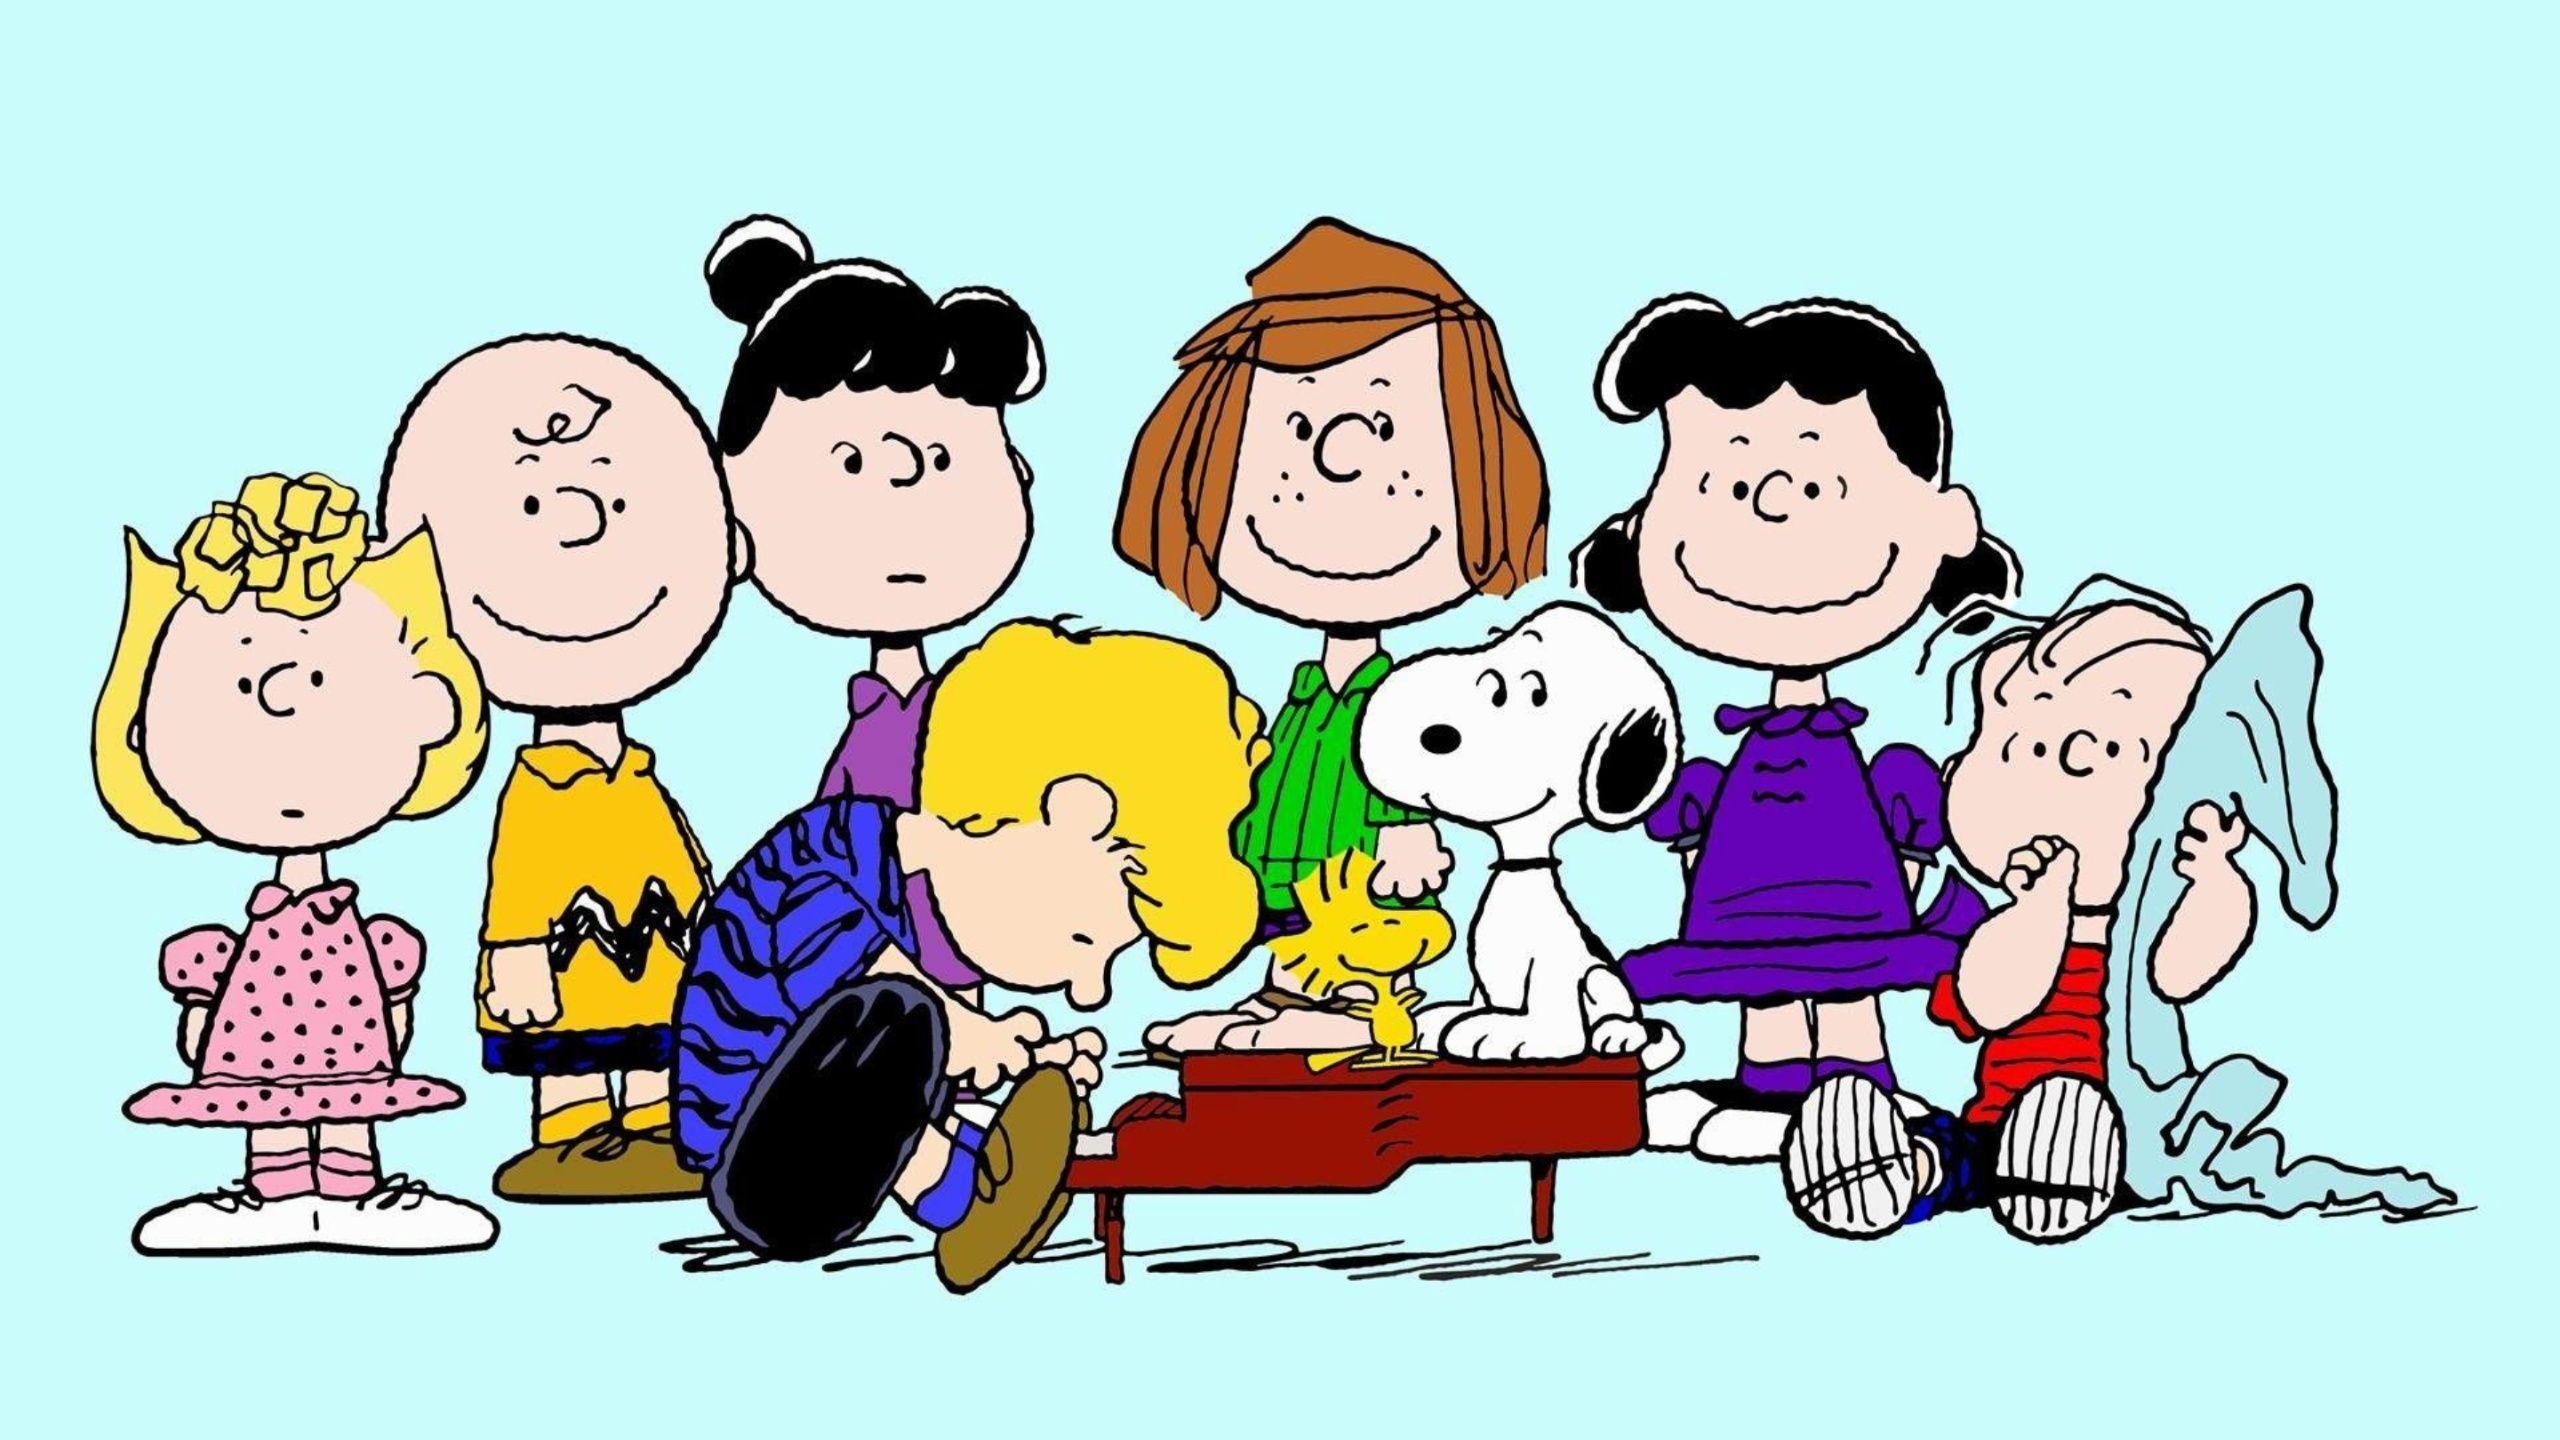 The Peanuts kids and Snoopy